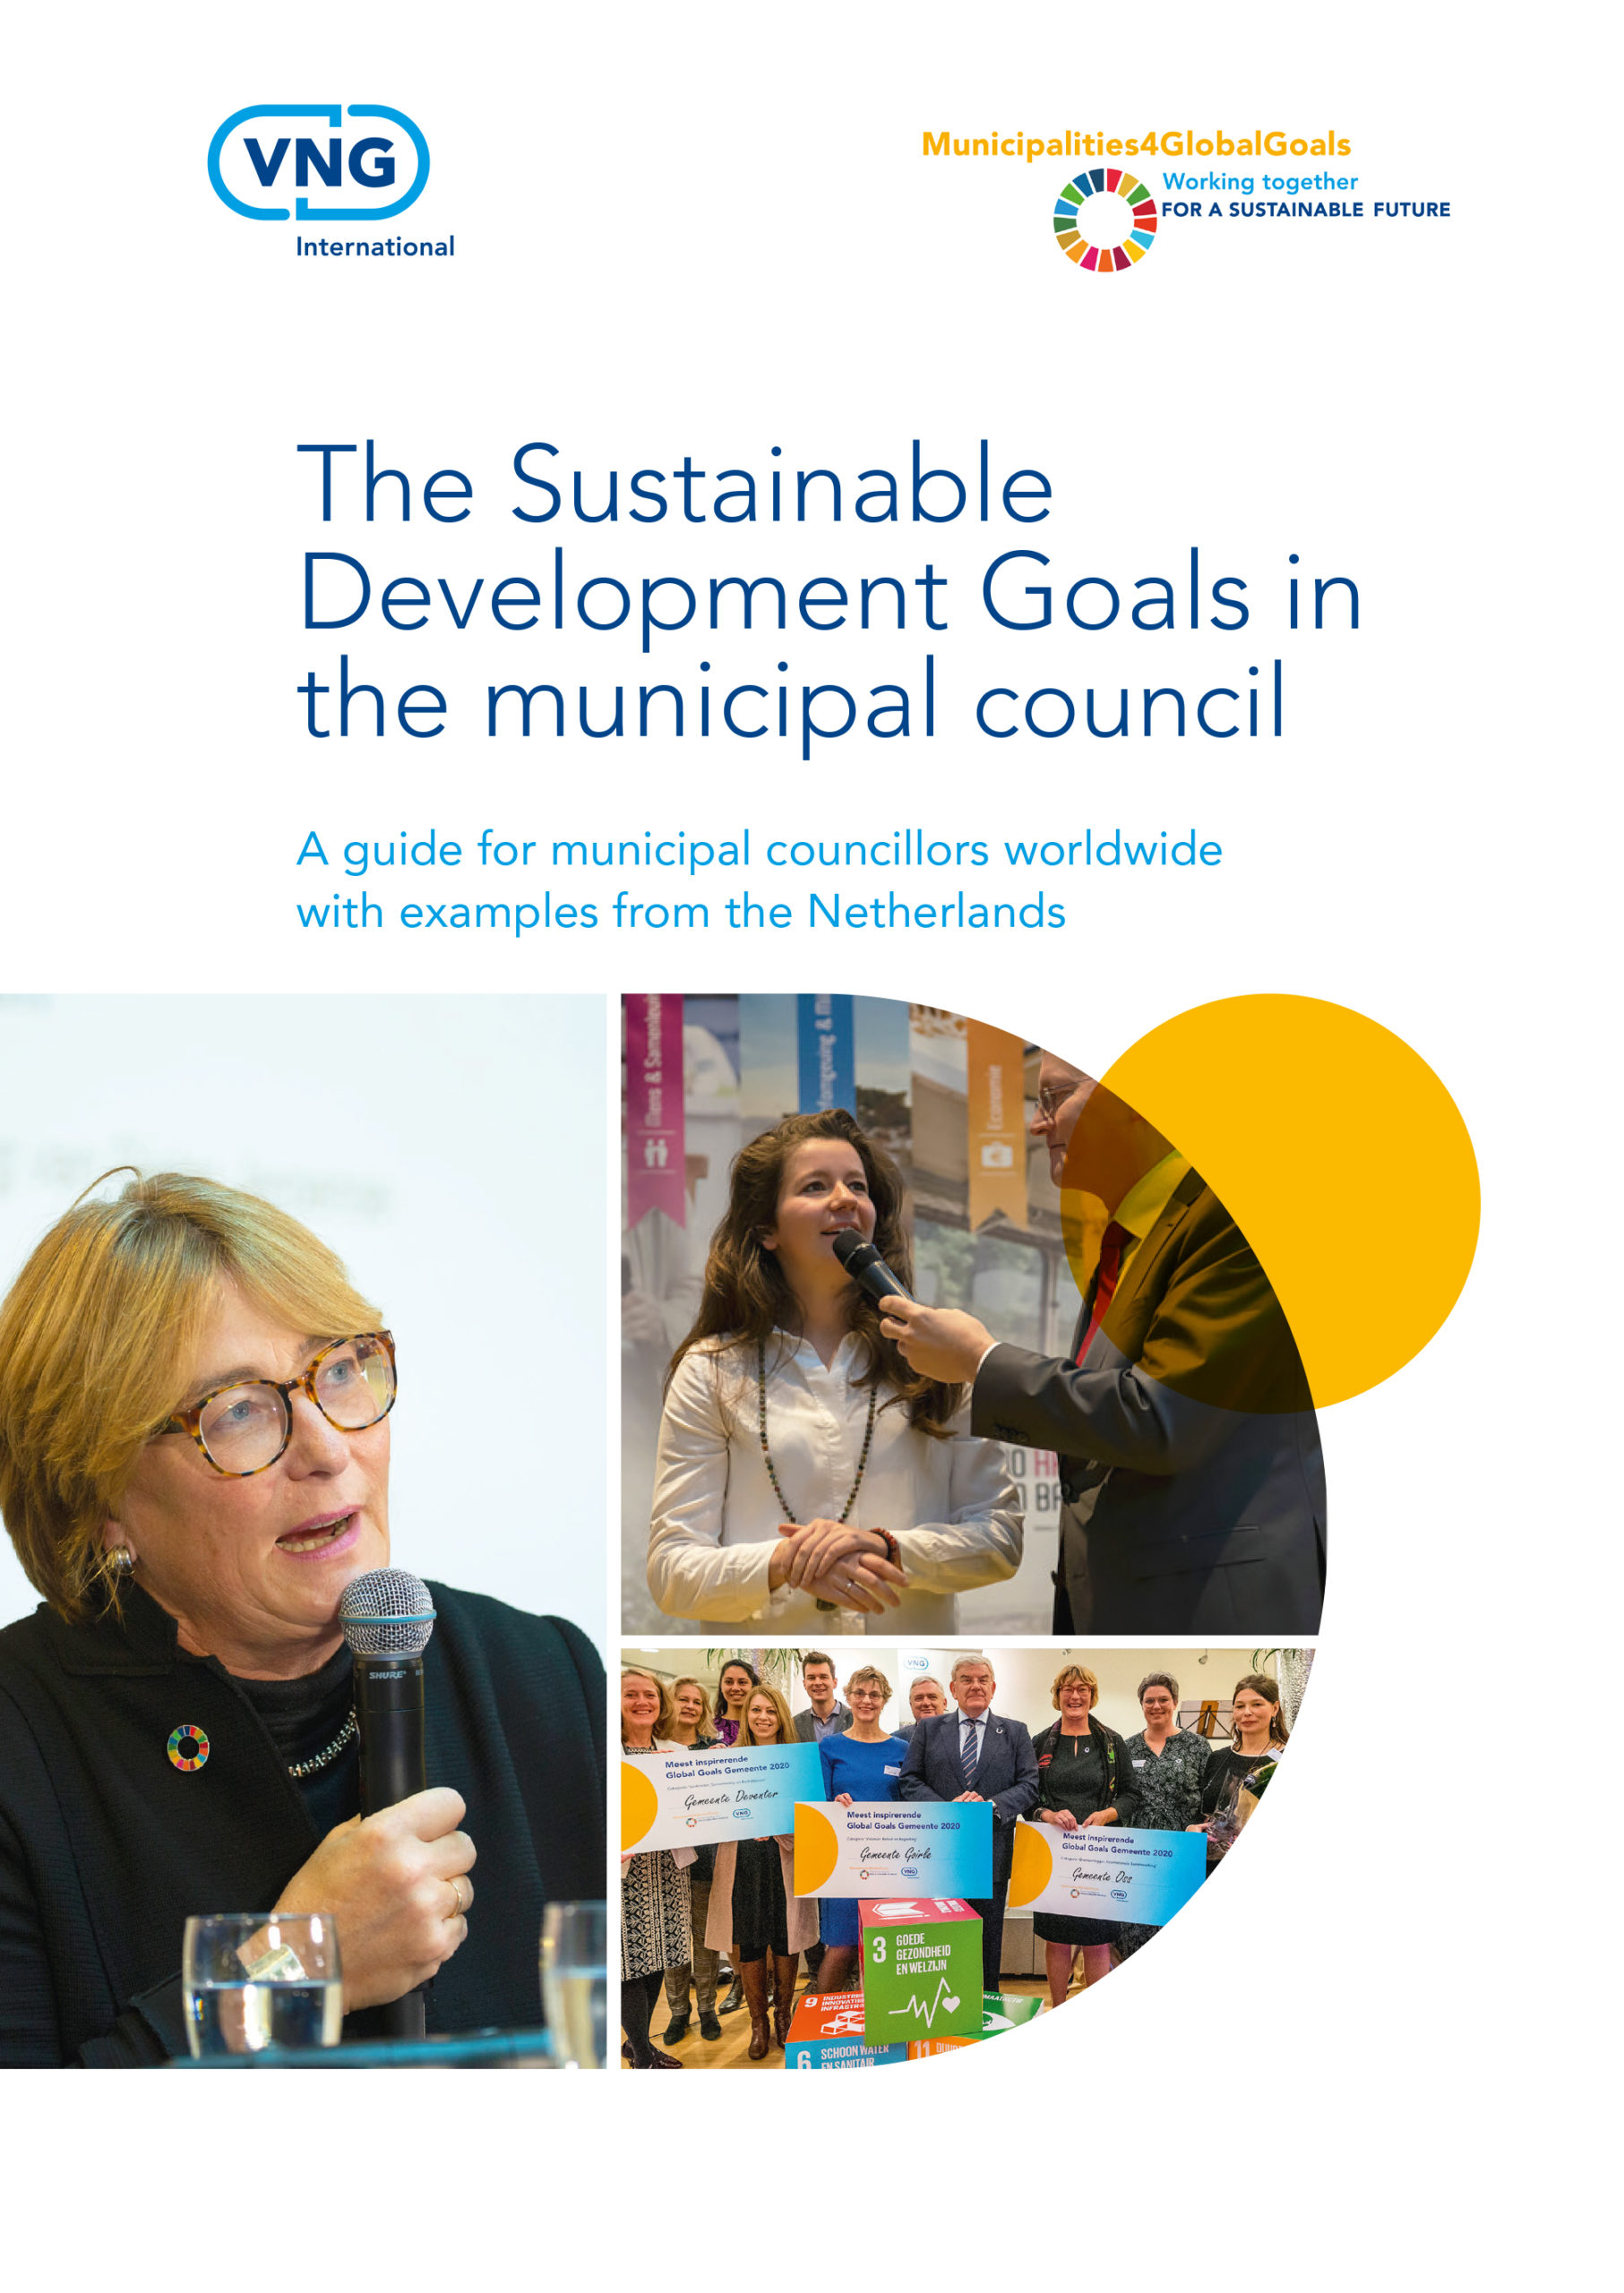 The Sustainable Development Goals in the municipal council | A guide for municipal councillors worldwide with examples from the Netherlands